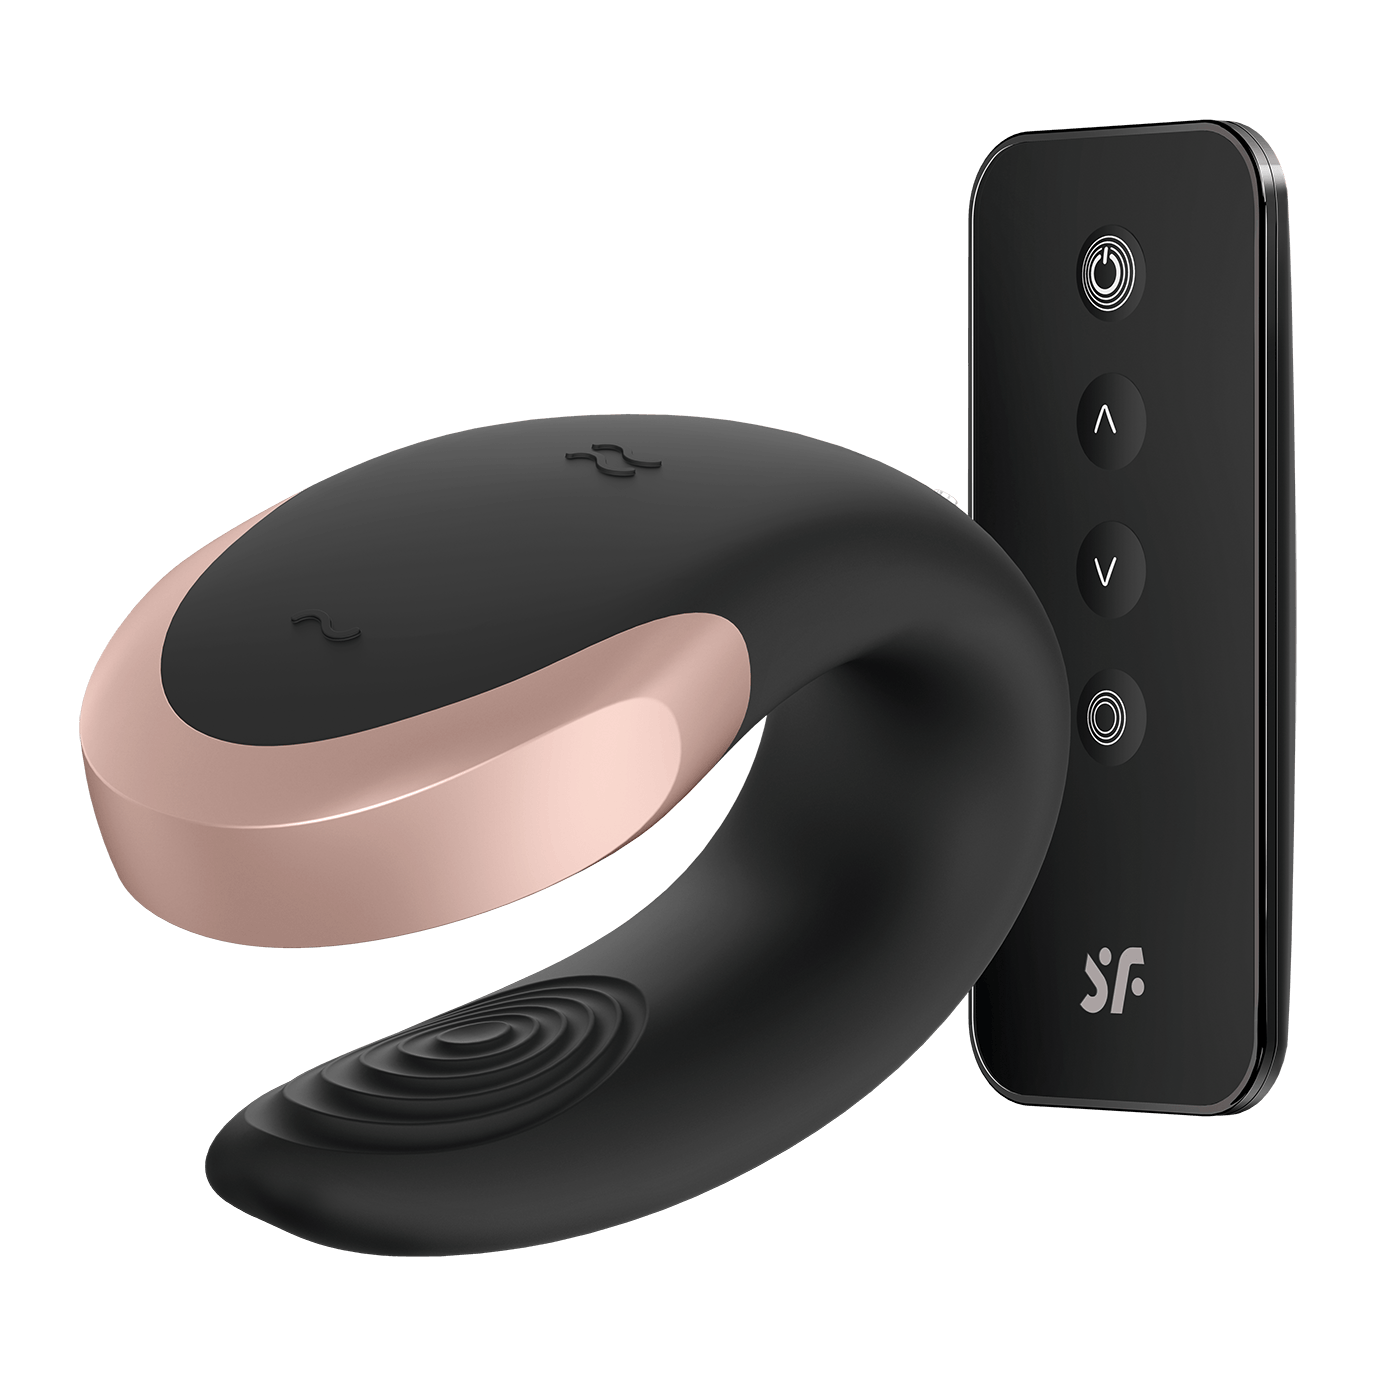 Satisfyer Double Love App-Enabled Wearable Couples Vibrator with Remote Control - Hamilton Park Electronics